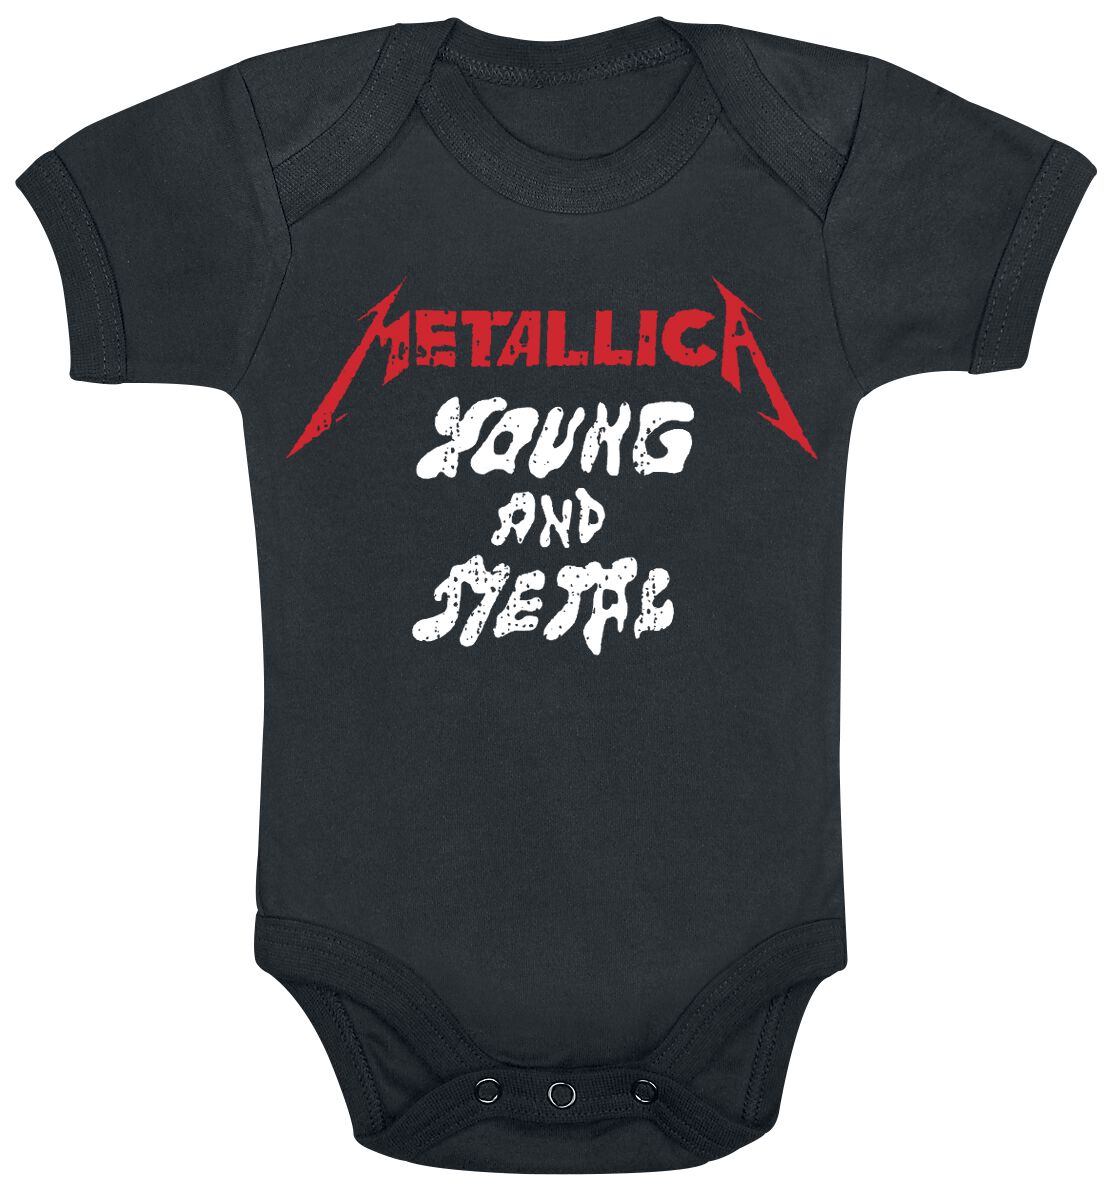 Metallica Young And Metal Body black